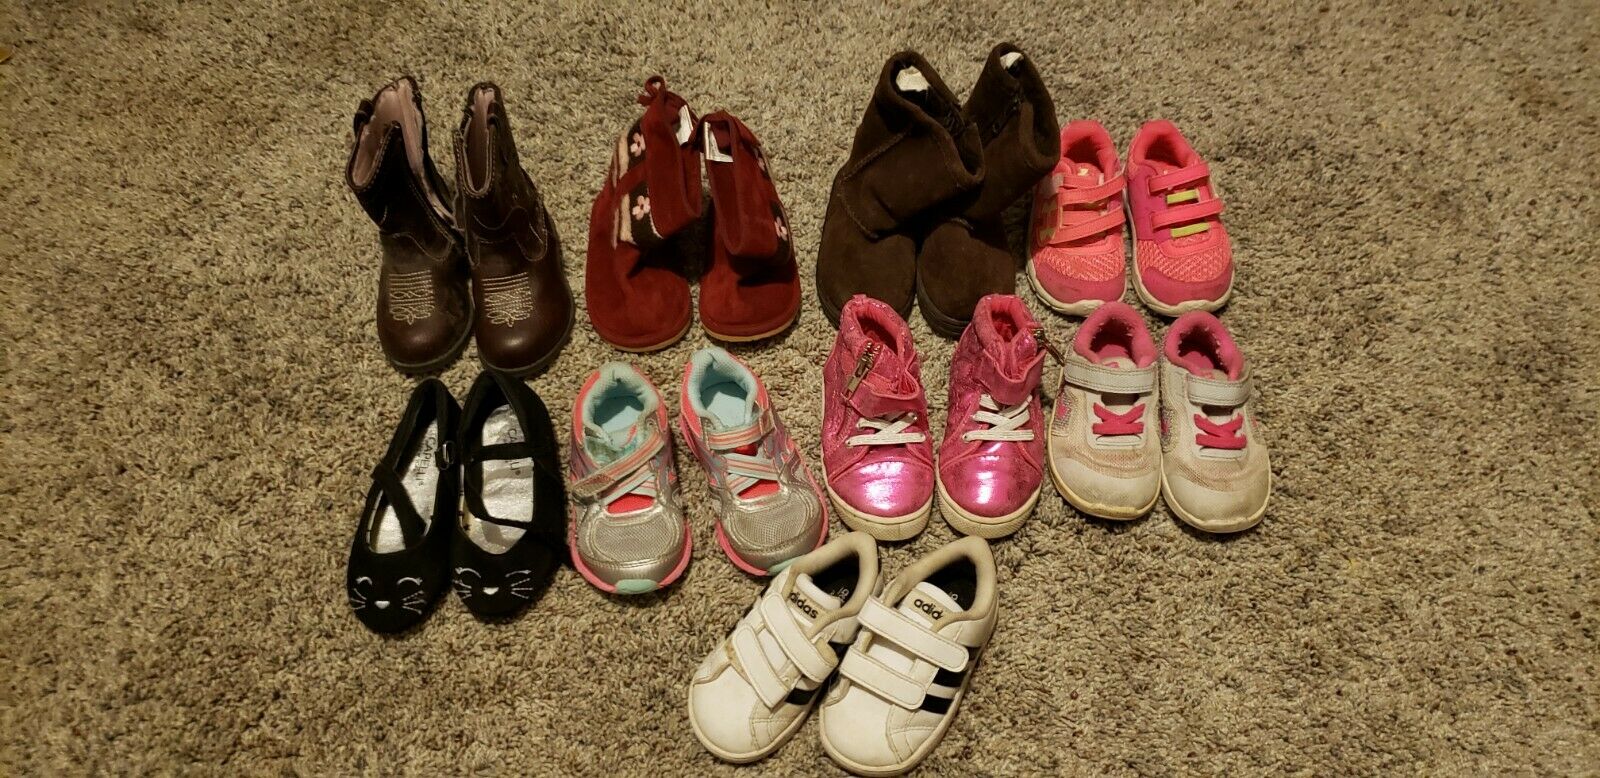 Toddler Shoes Size 5 Lot of 9 Shoes